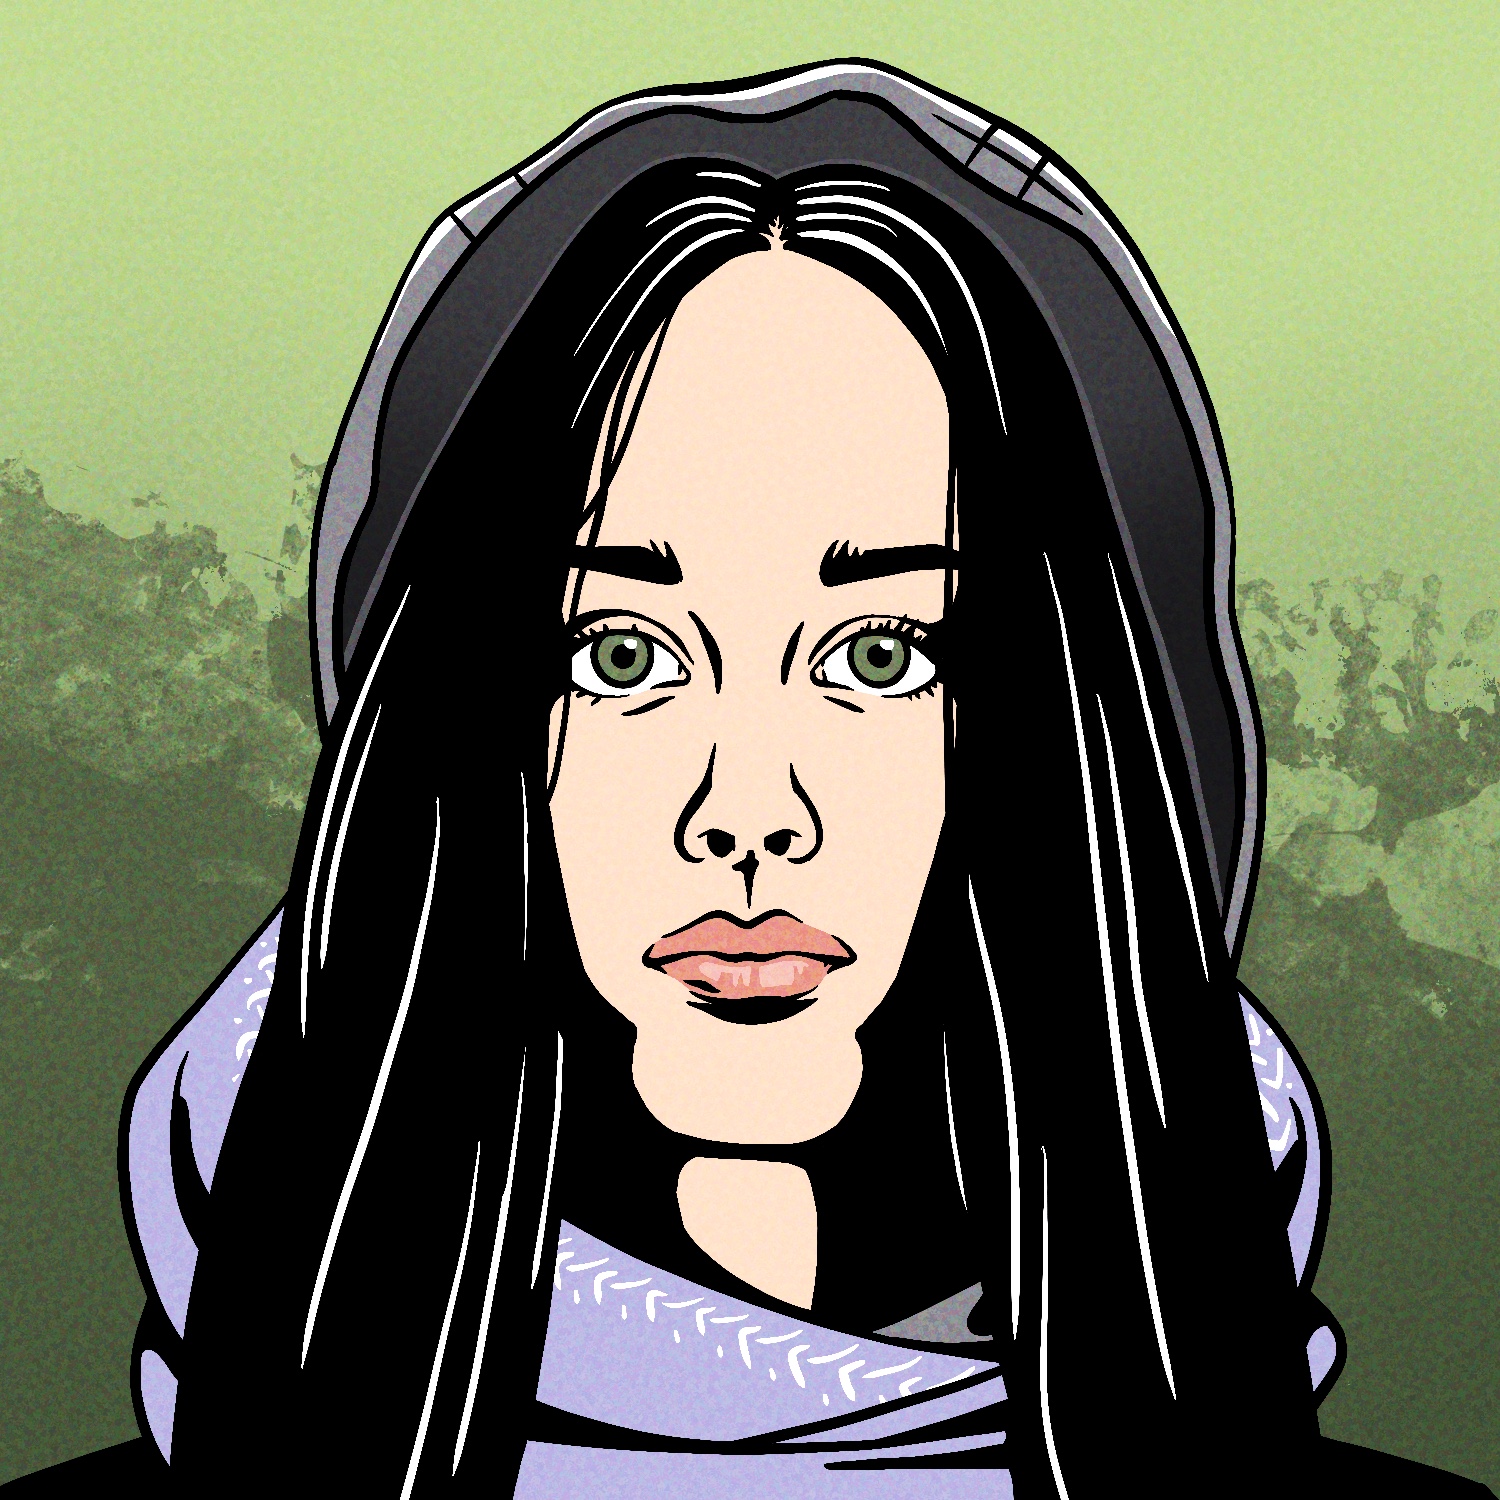 An illustration of a woman wearing a scarf and hood. The woman is staring directly at the viewer, with an expressionless face. She has a light complexion, black hair, and green eyes. The sides of her face are shrouded in a hard black shadow. The scarf is light lavender and the hood is gray. The background is an olive green.